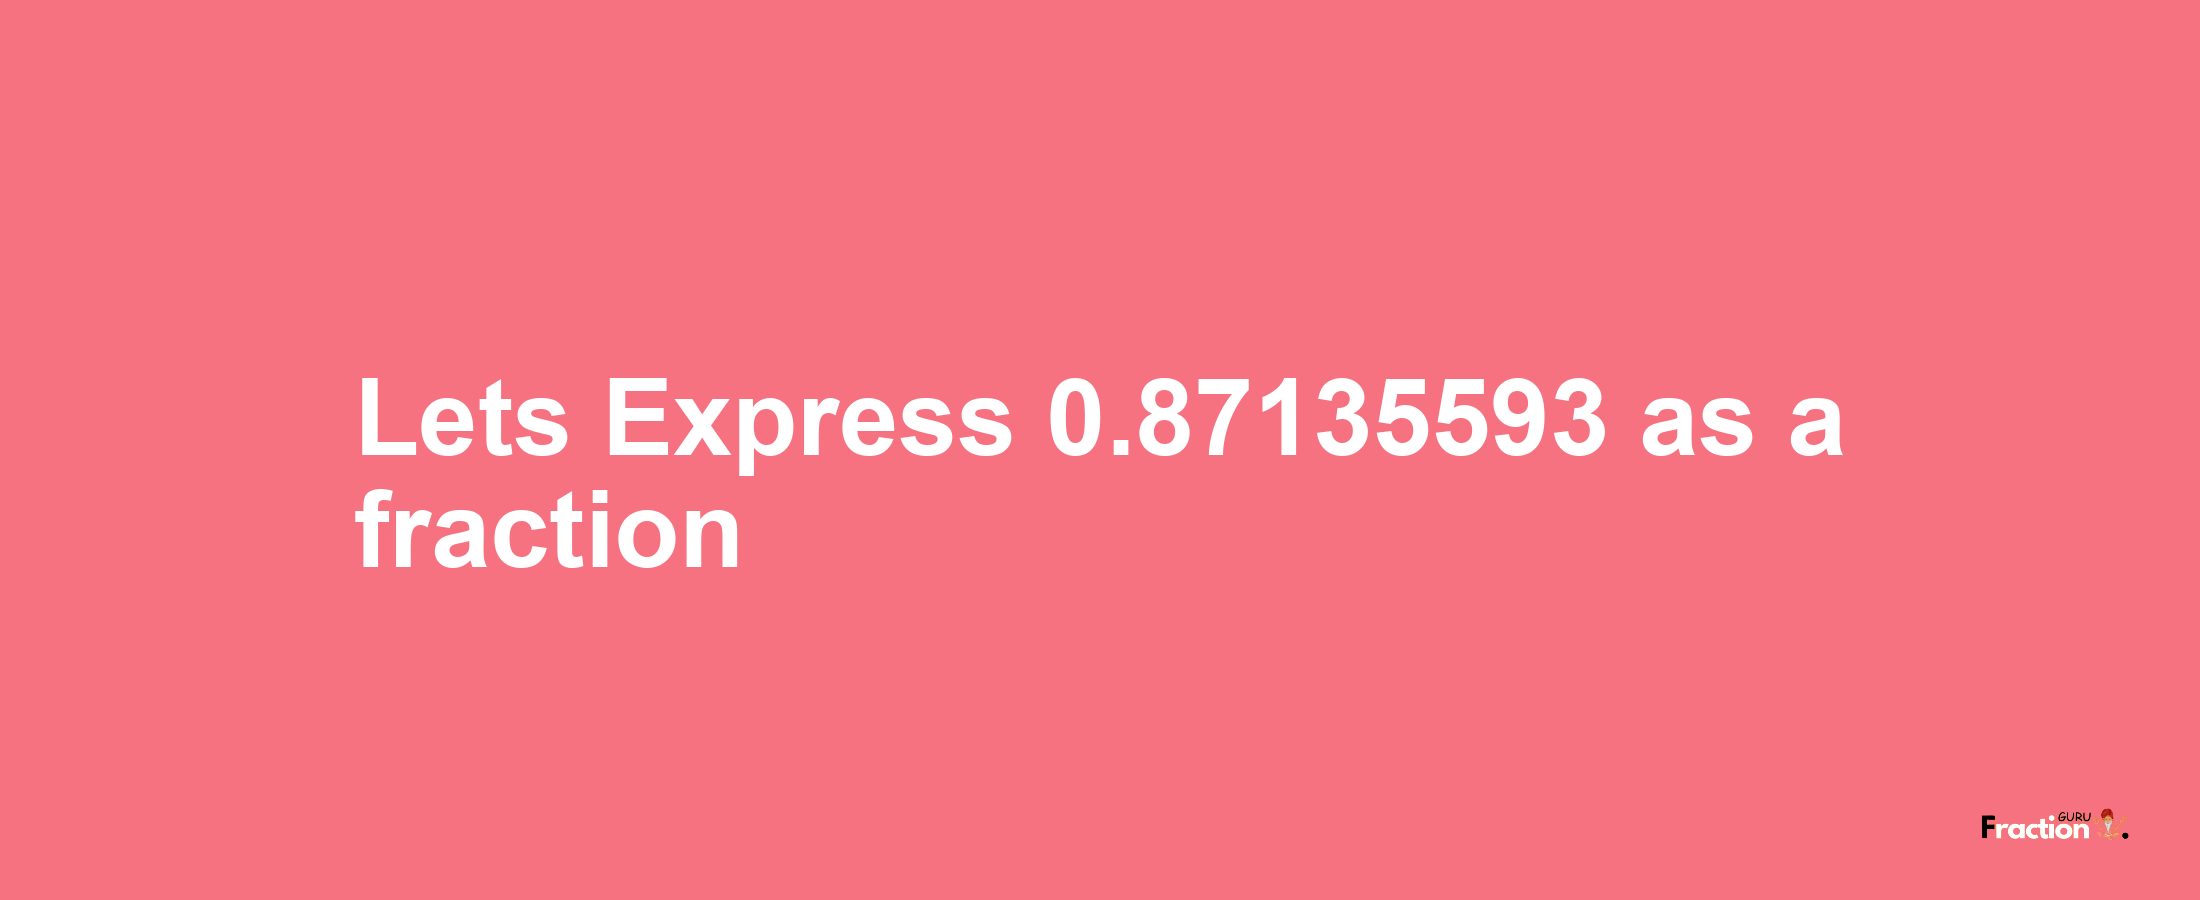 Lets Express 0.87135593 as afraction